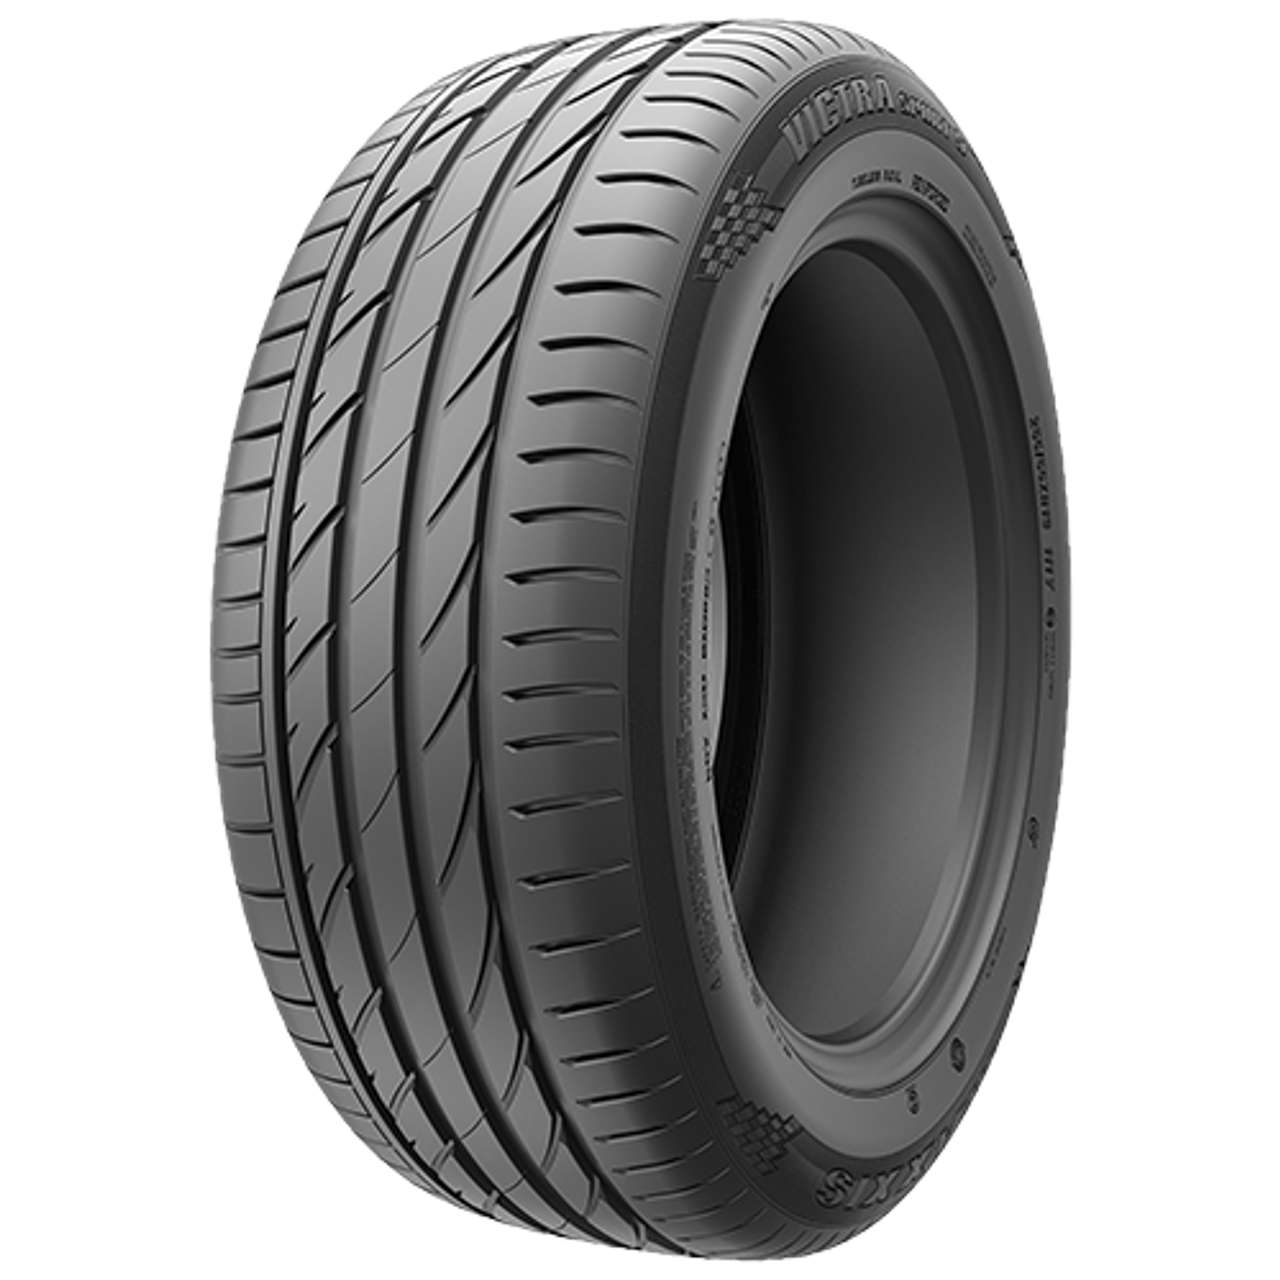 MAXXIS VICTRA SPORT 5 (VS5) 255/45ZR19 104Y MFS BSW